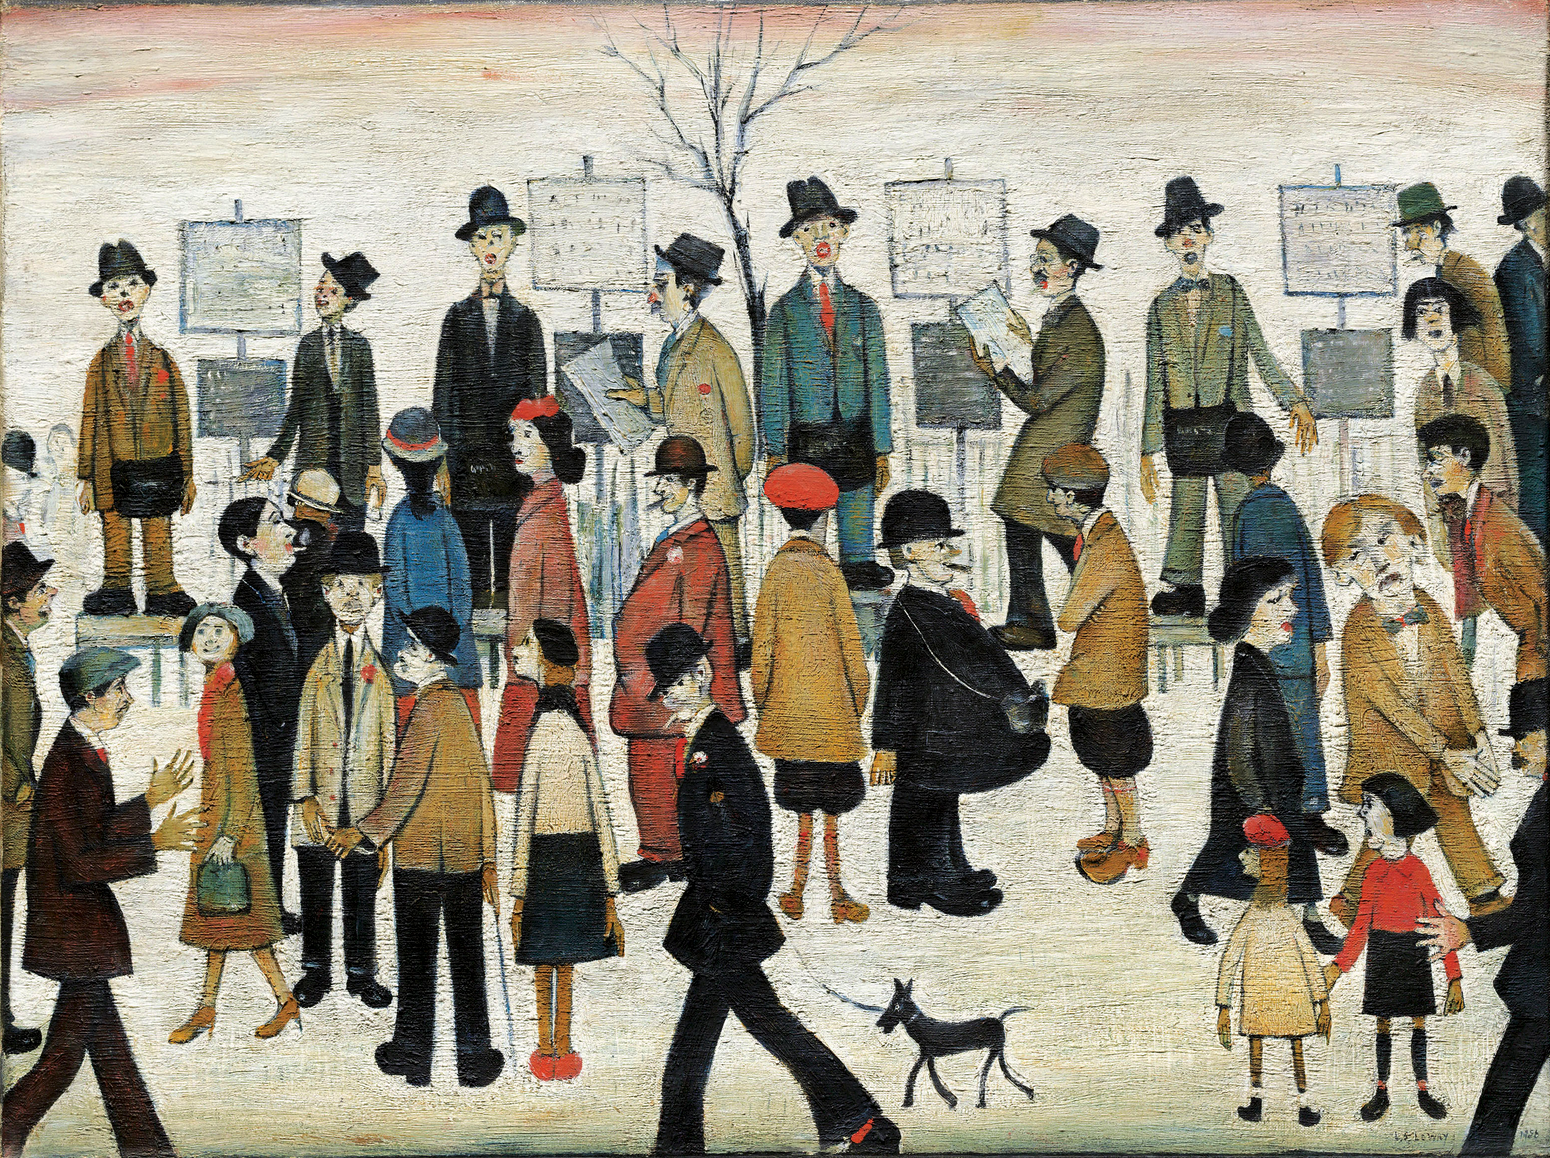 A Northern Race Meeting (1956) by Laurence Stephen Lowry (1887 - 1976), English artist.